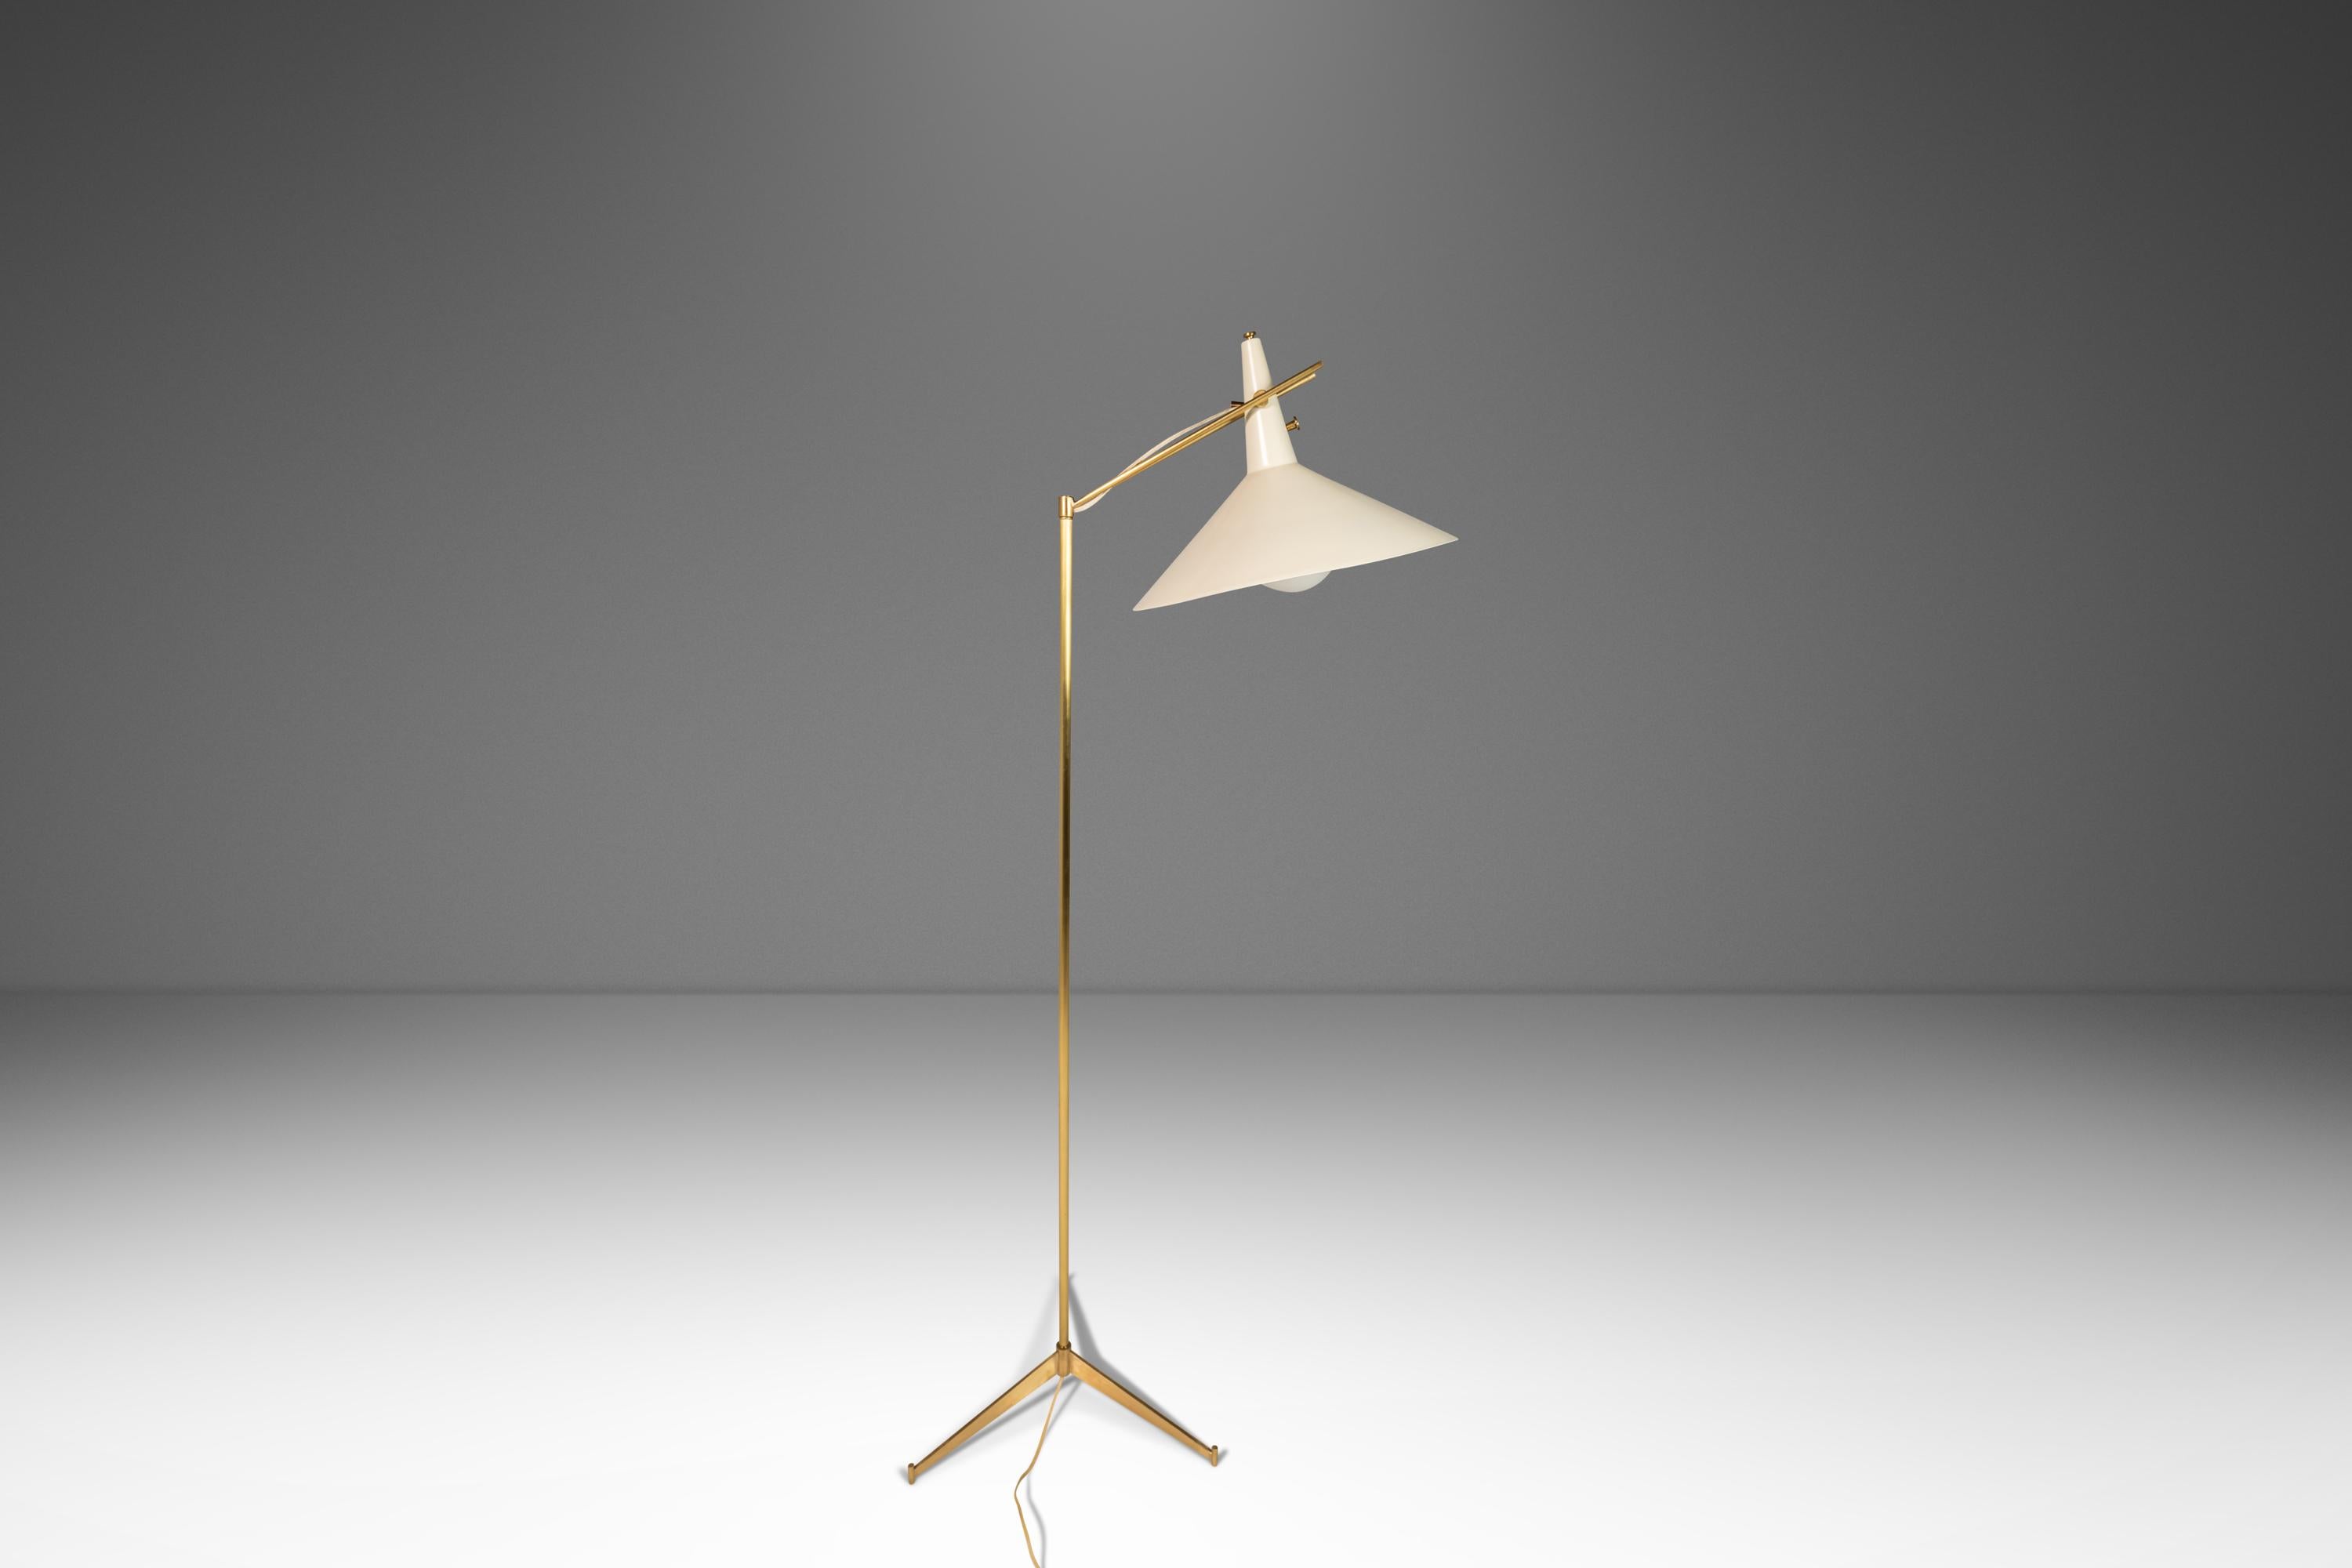 Mid-20th Century Mid-Century Model E-11 Floor Lamp by Paul McCobb for Directional, USA, c. 1950's For Sale